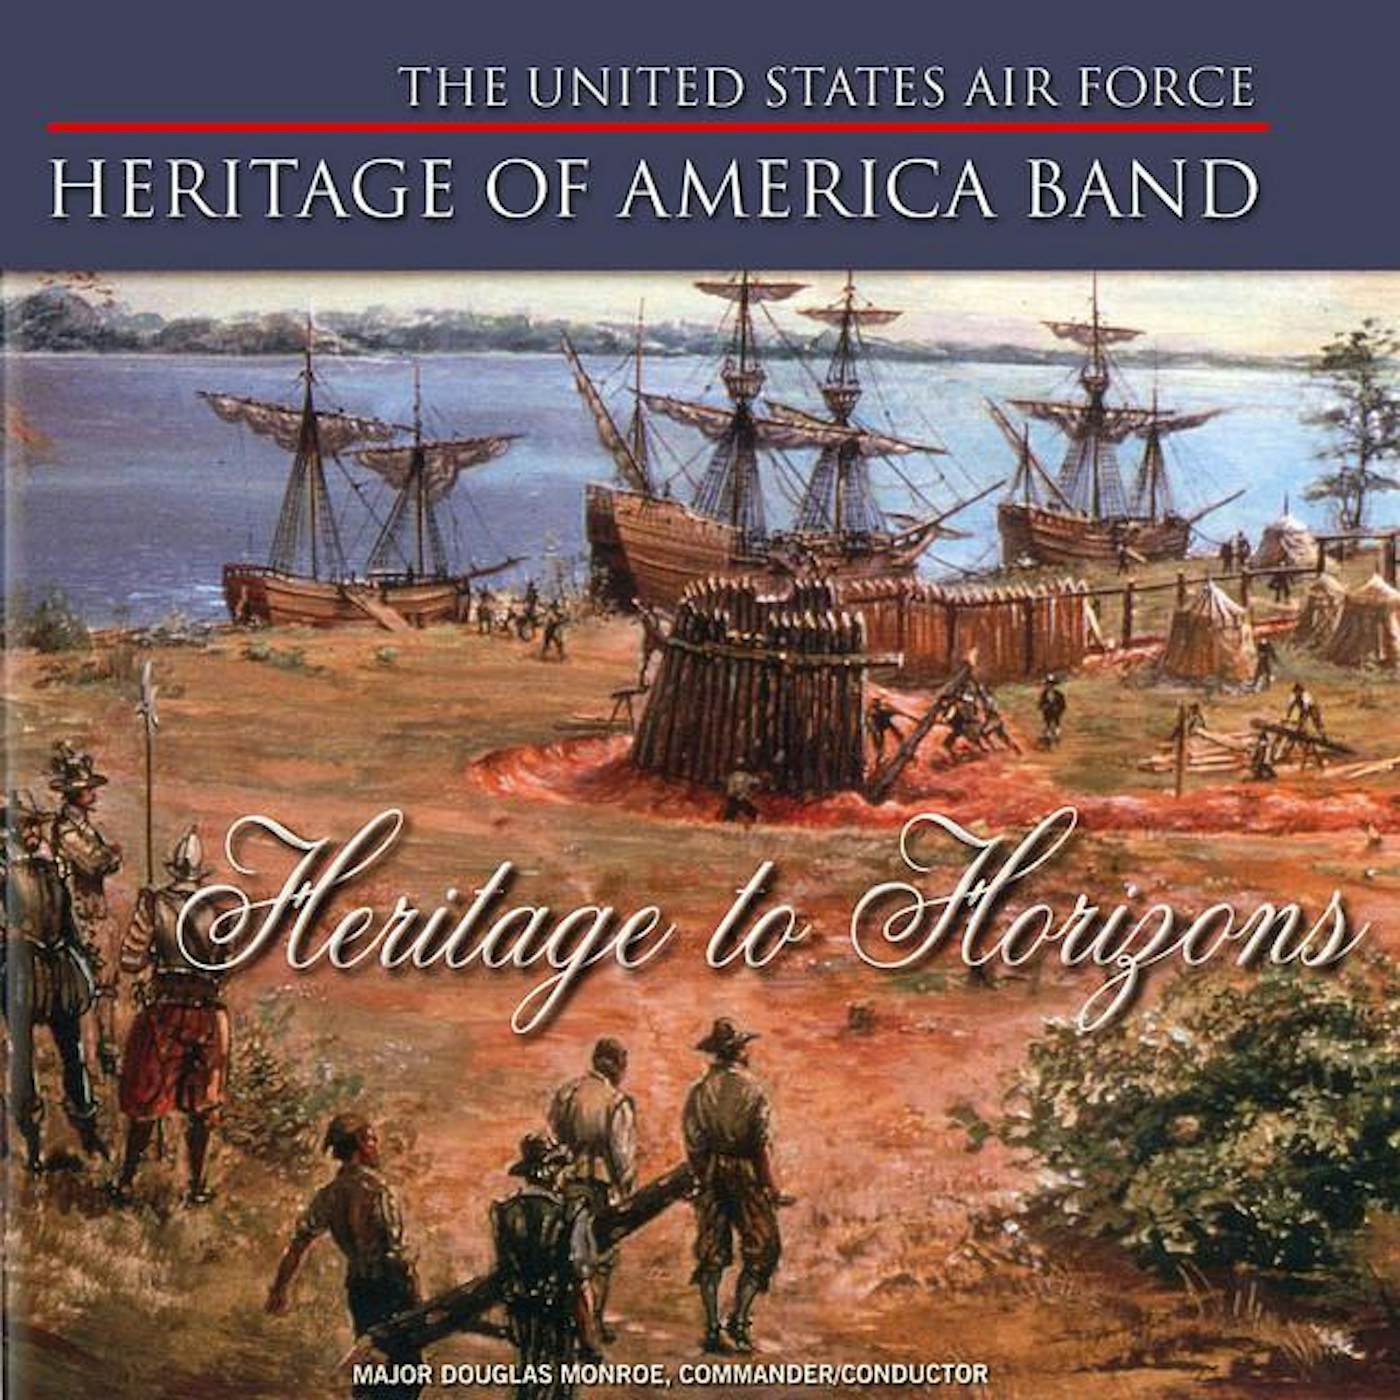 US Air Force Heritage of America Band